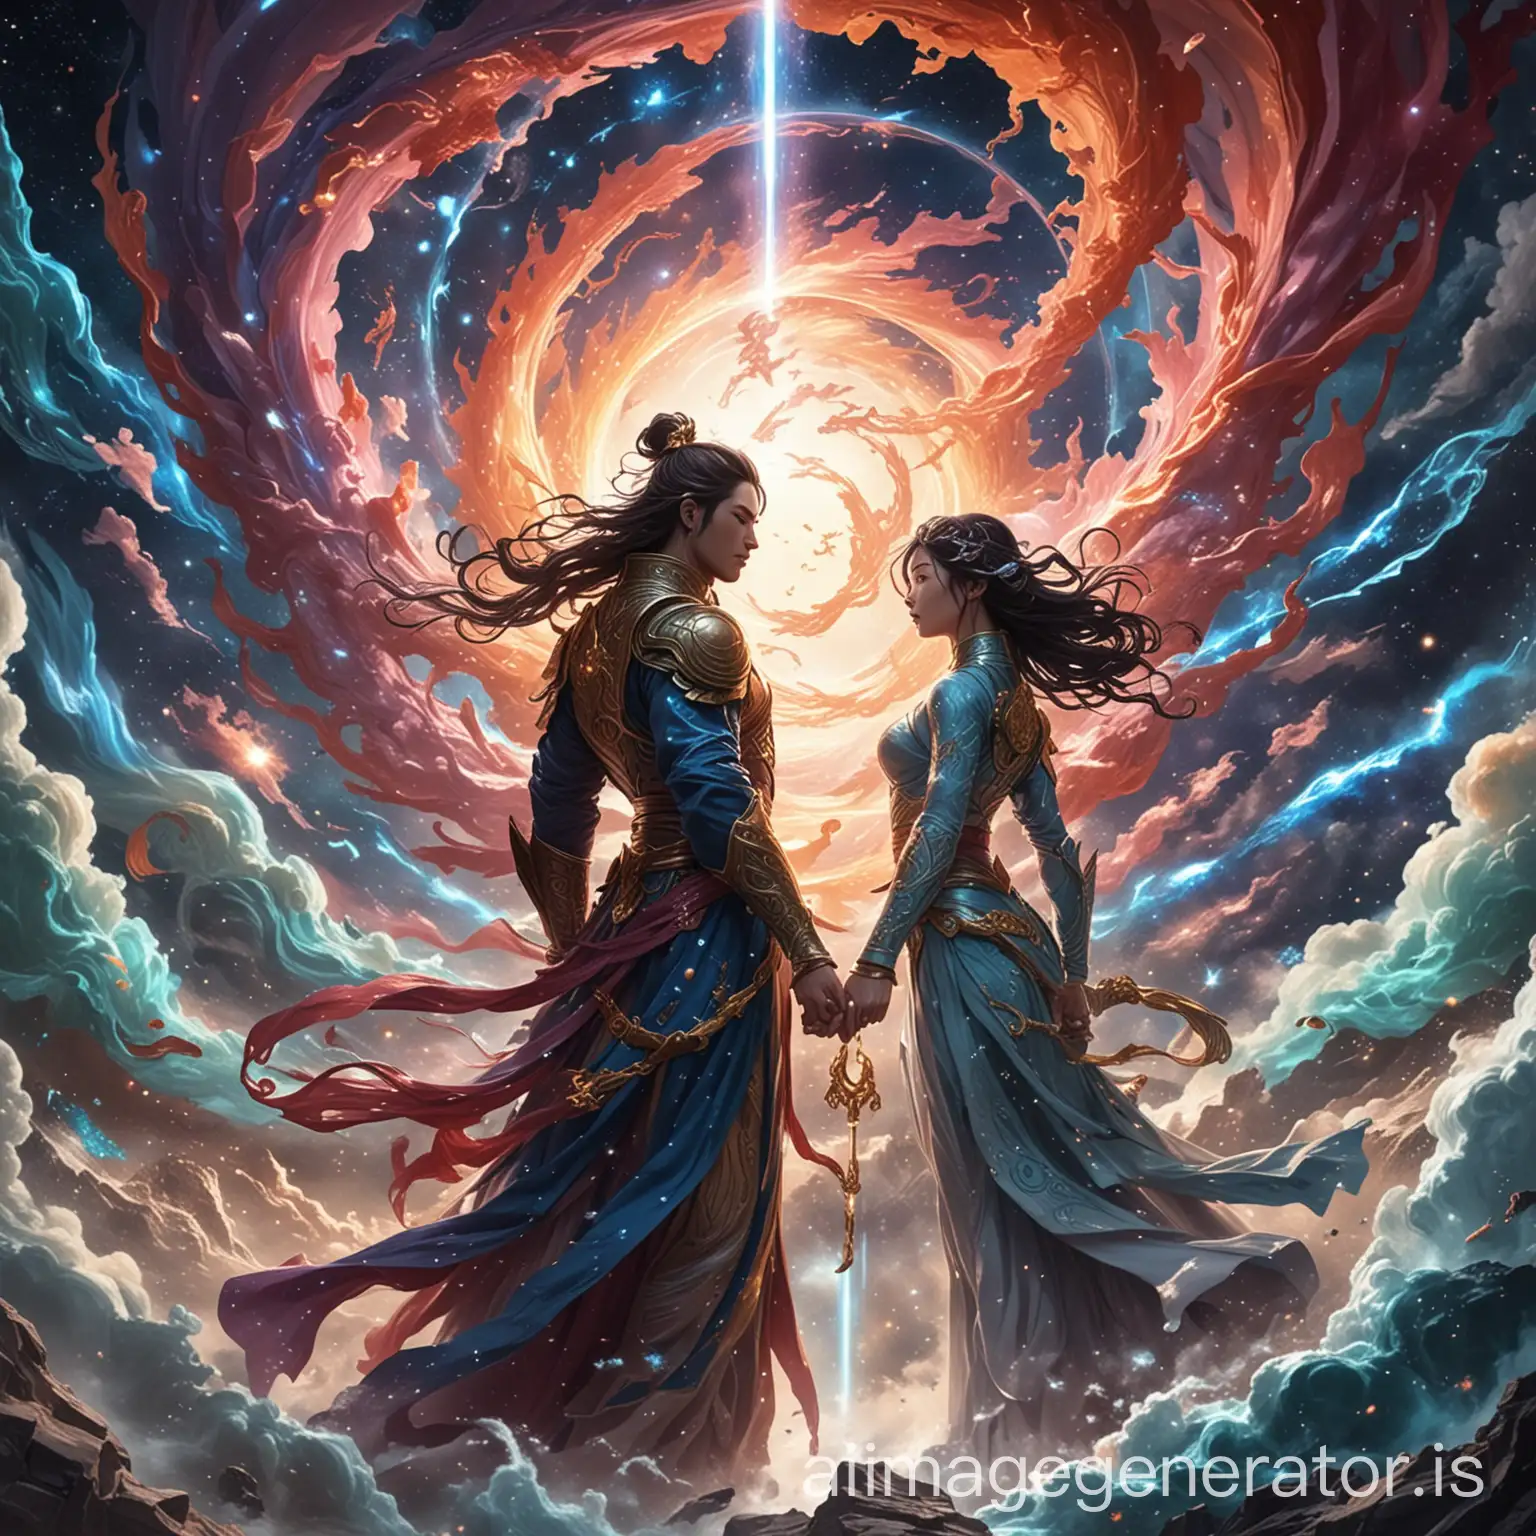 The cover for "Astral Redemption" blends Chinese/Korean comic style with cosmic grandeur, focusing on Astra. The Aquarius Queen and Ophiuchus King stand against a swirling vortex, symbolizing unity and celestial power. Colossal creatures clash in the foreground, representing the ongoing battle against darkness. Detailed artwork depicts Astra's mythical landscapes and celestial phenomena, drawing readers into its vibrant world. This captivating cover promises an epic tale of love, betrayal, and redemption amidst cosmic adversity.